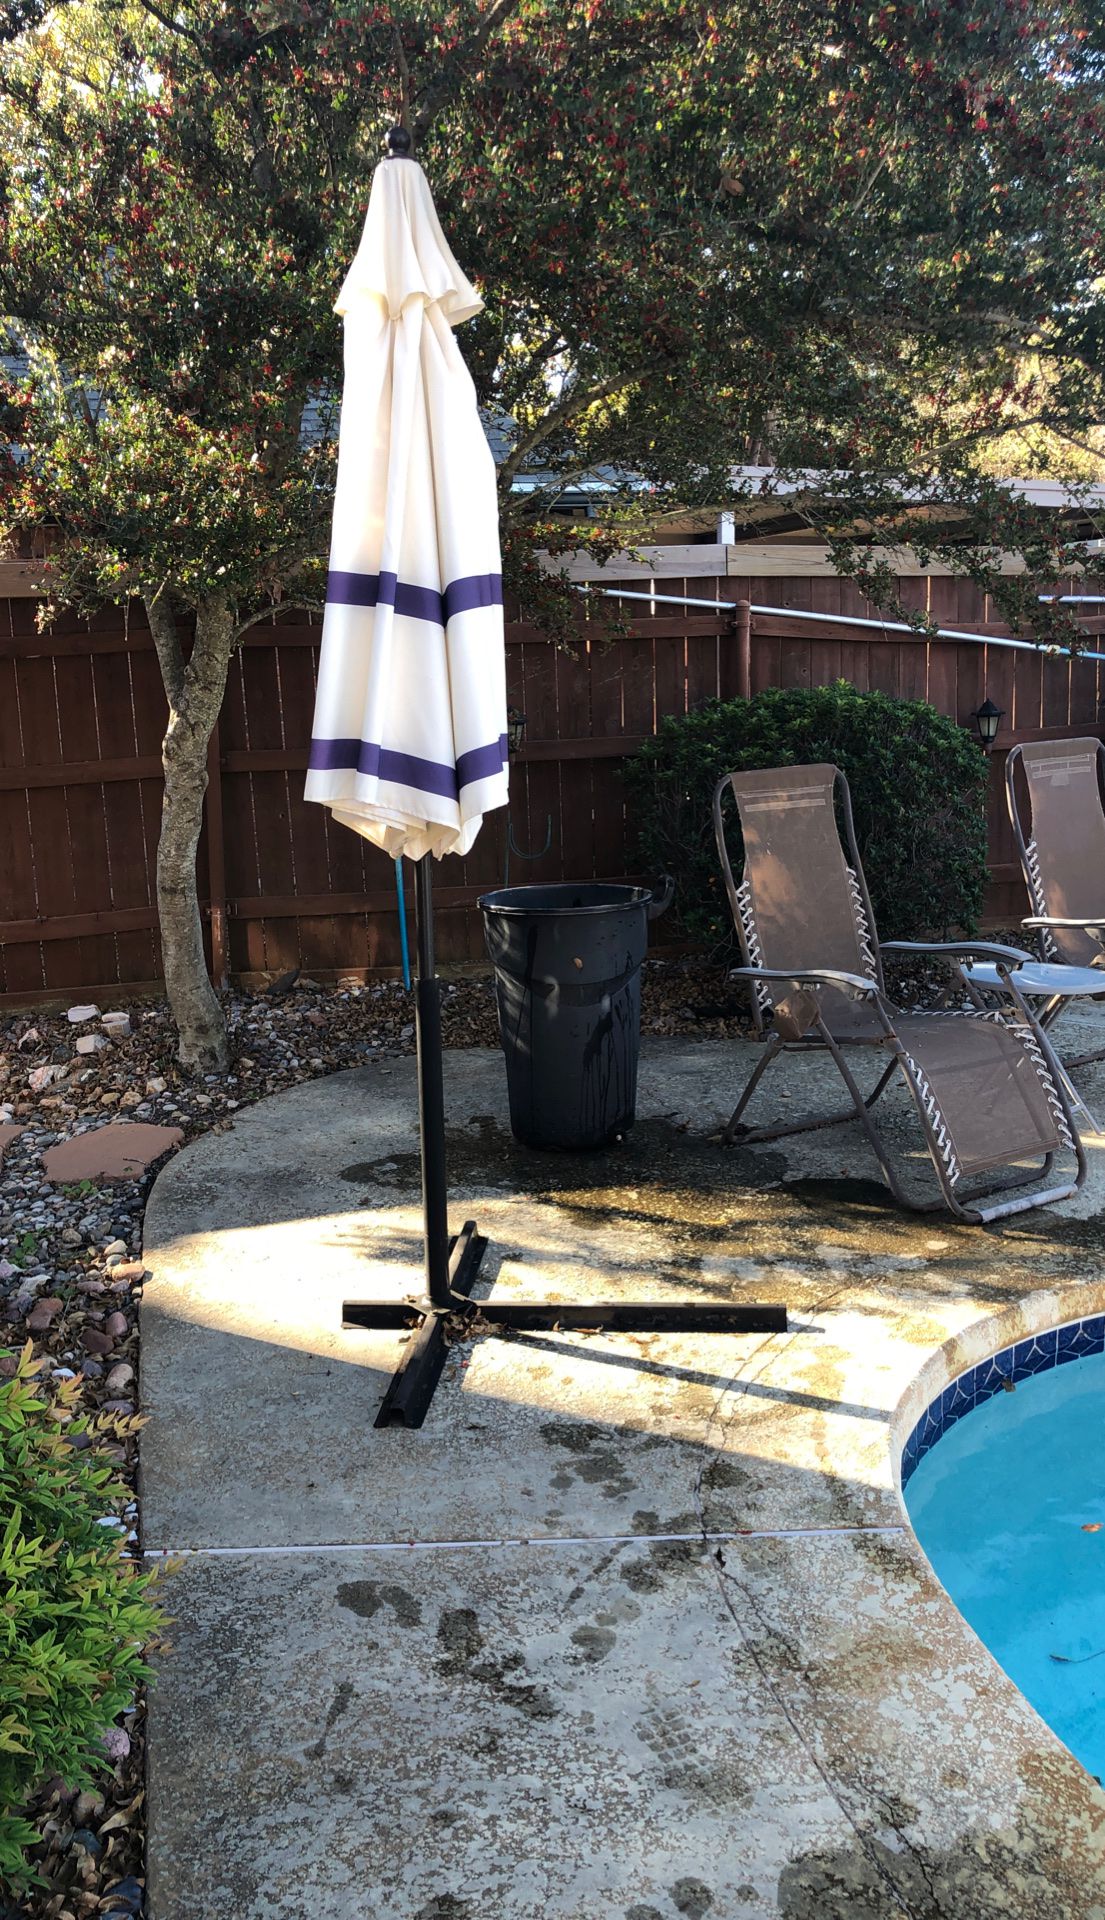 Pool umbrella with stand.